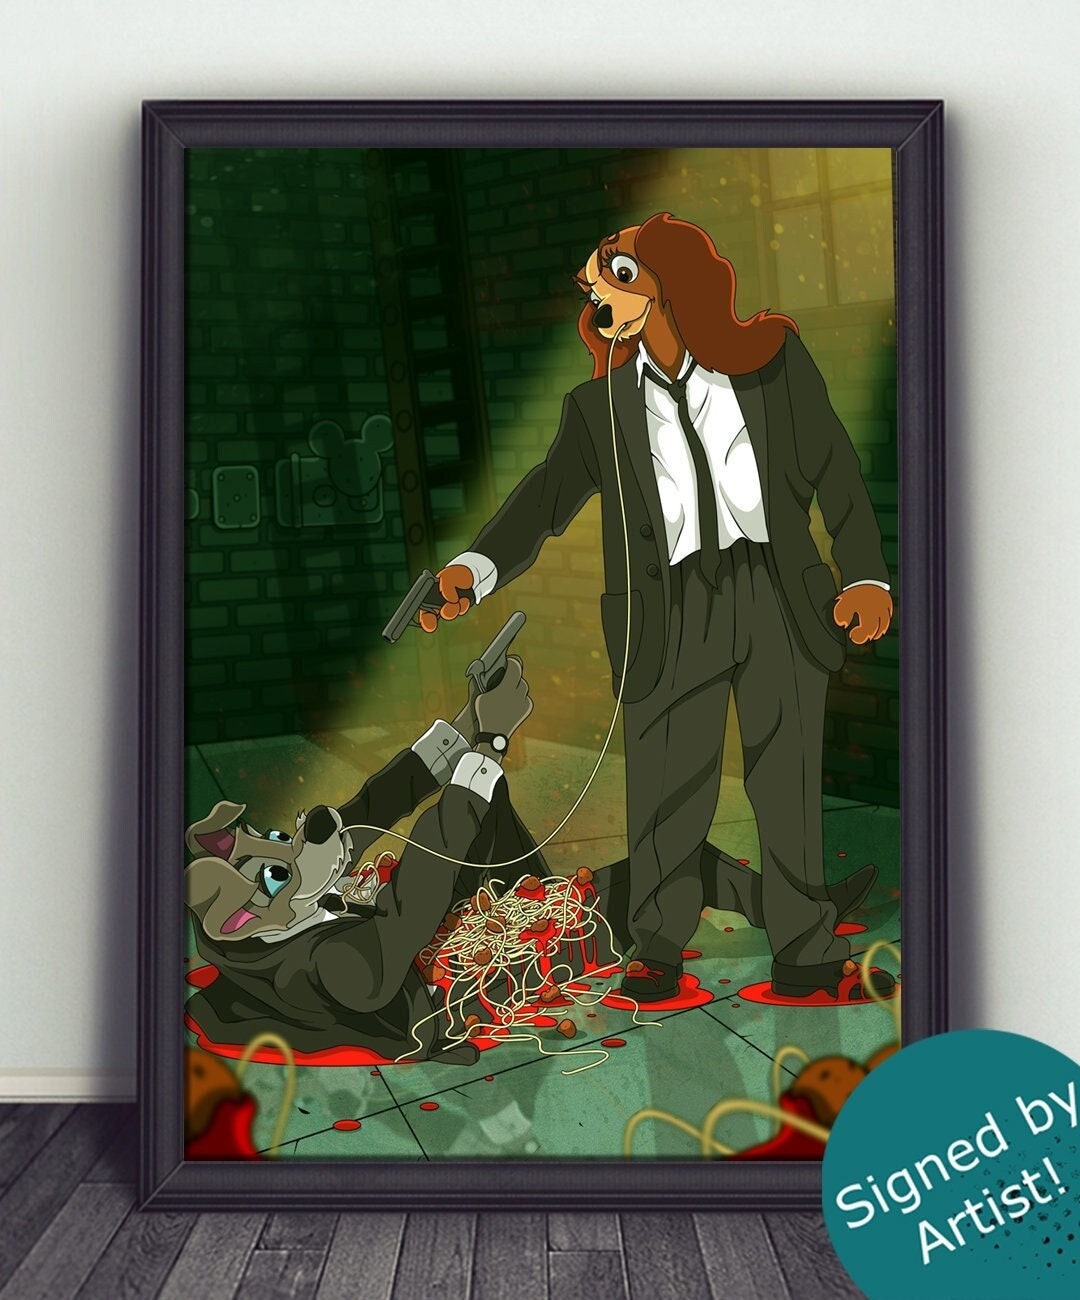 Reservoir Dogs Lady and the Tramp Style Art Print Limited